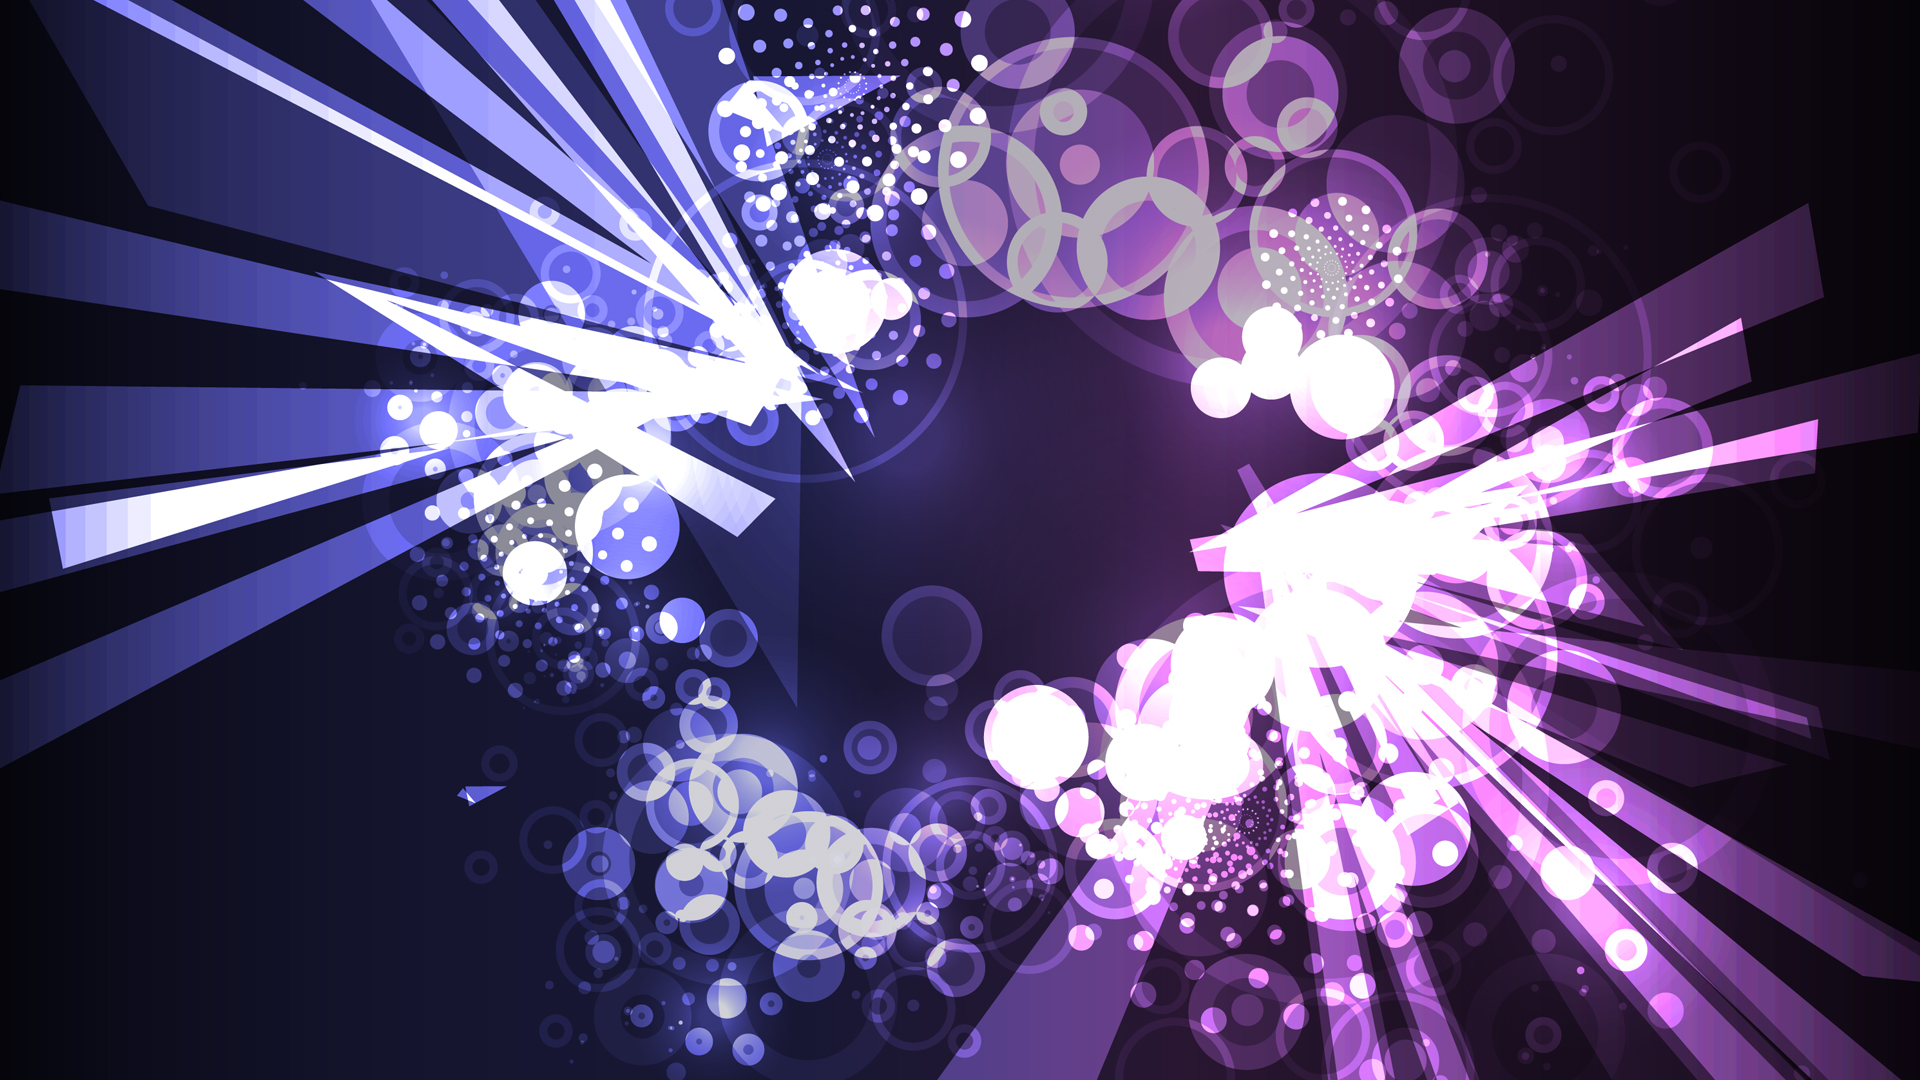 General 1920x1080 vector purple background abstract digital art shapes blue white purple